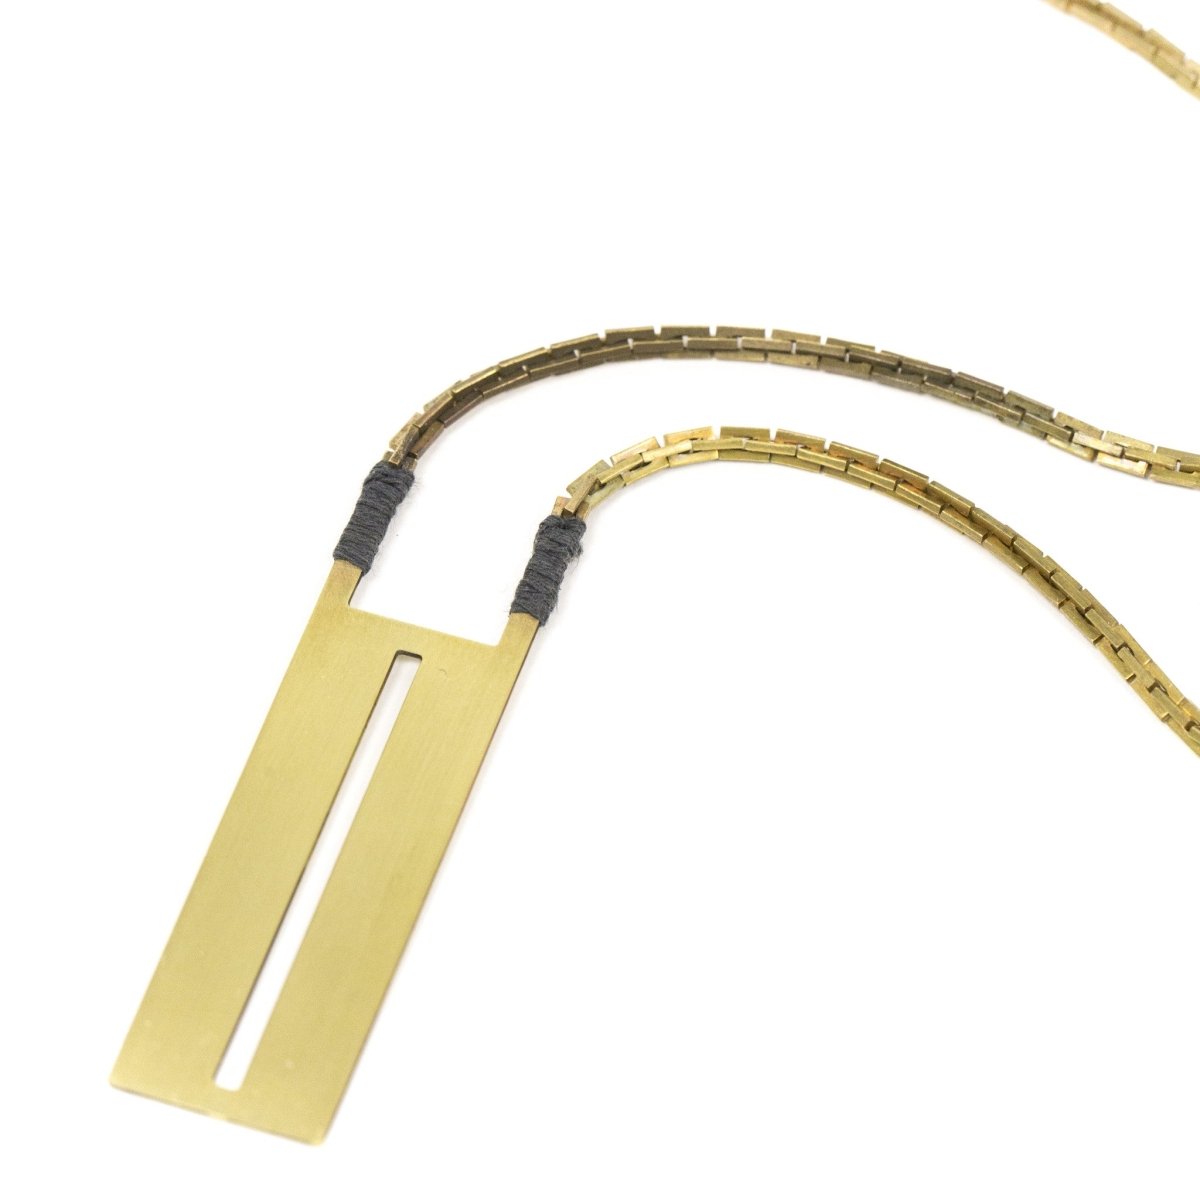 Long statement necklace featuring a vintage deco brass box chain, gray Japanese cotton accents, and a rectangular brass pendant with a thin, slit cutout down the center. Hand-crafted in Portland, Oregon. 